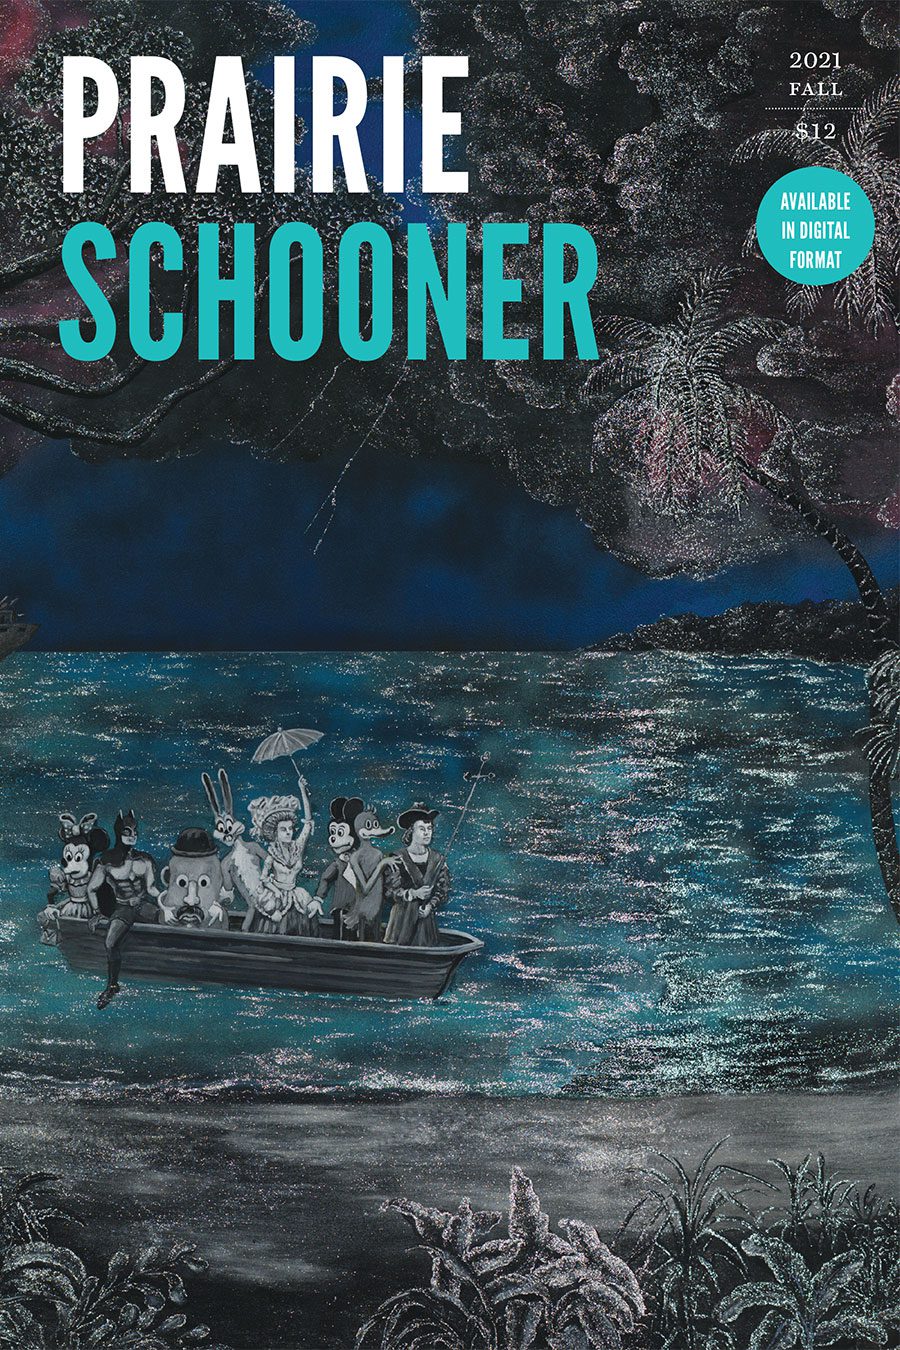 Issue cover with people in boat, rowing through water.